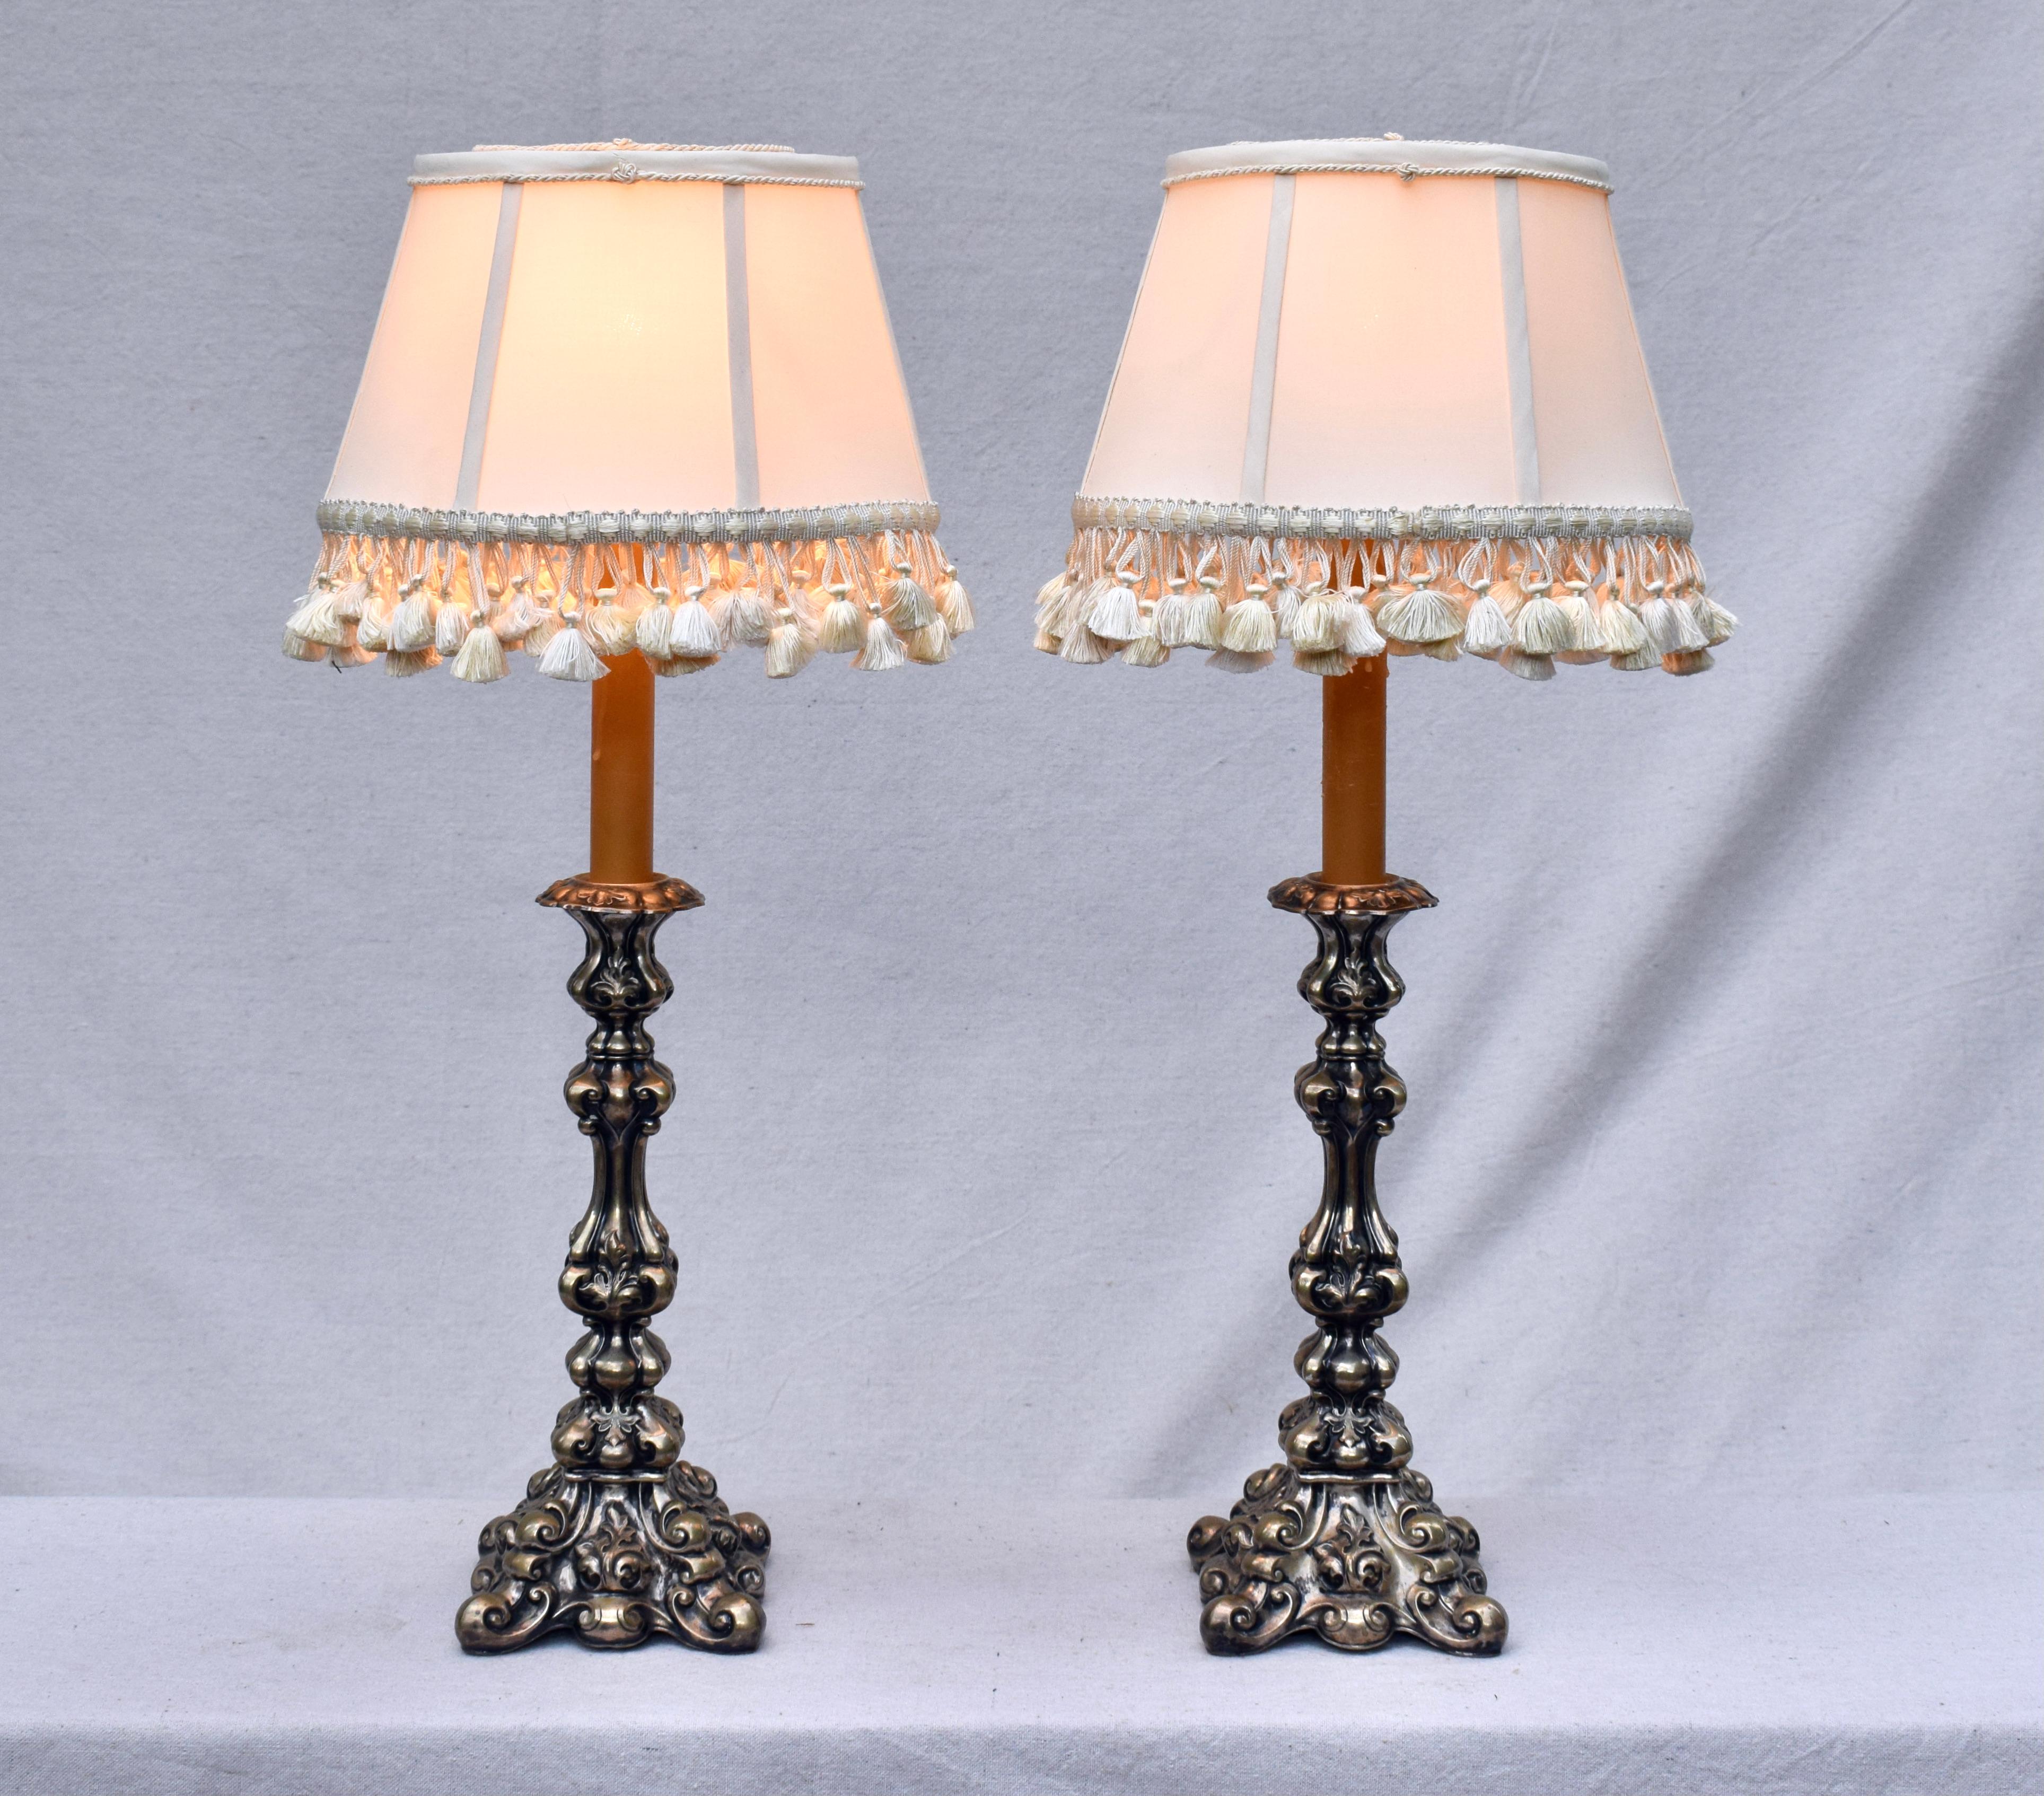 Italian Rococo Style Pair of Silver Candlestick Table Lamps For Sale 2